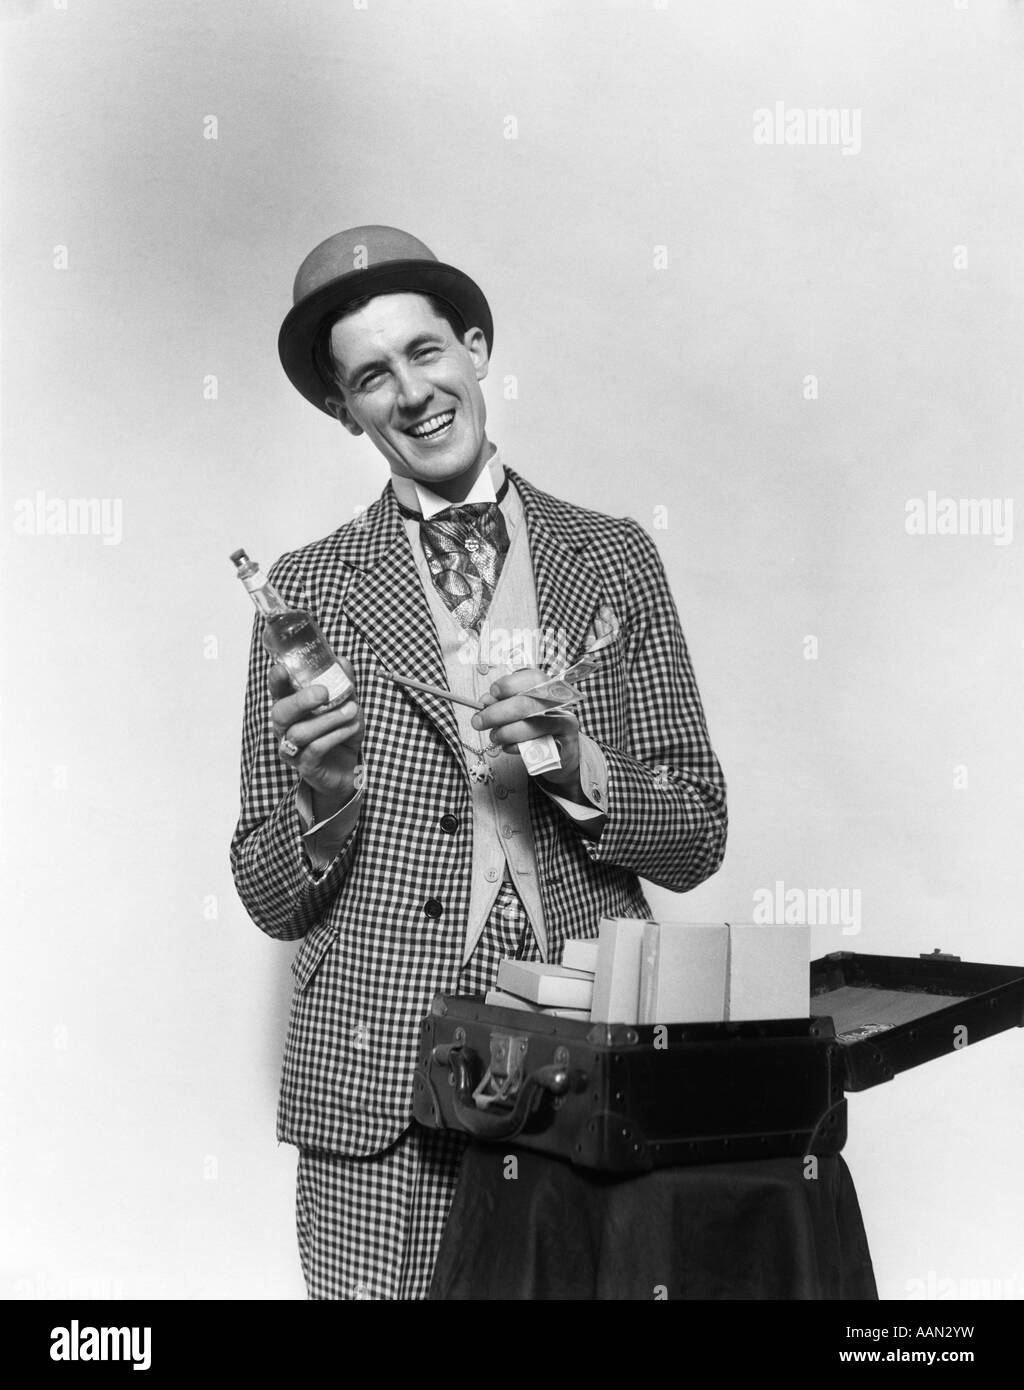 1930s SMILING BARKER IN CHECKERED SUIT WITH MONEY IN HAND POINTING TO BOTTLE OF TONIC LOOKING AT CAMERA Stock Photo